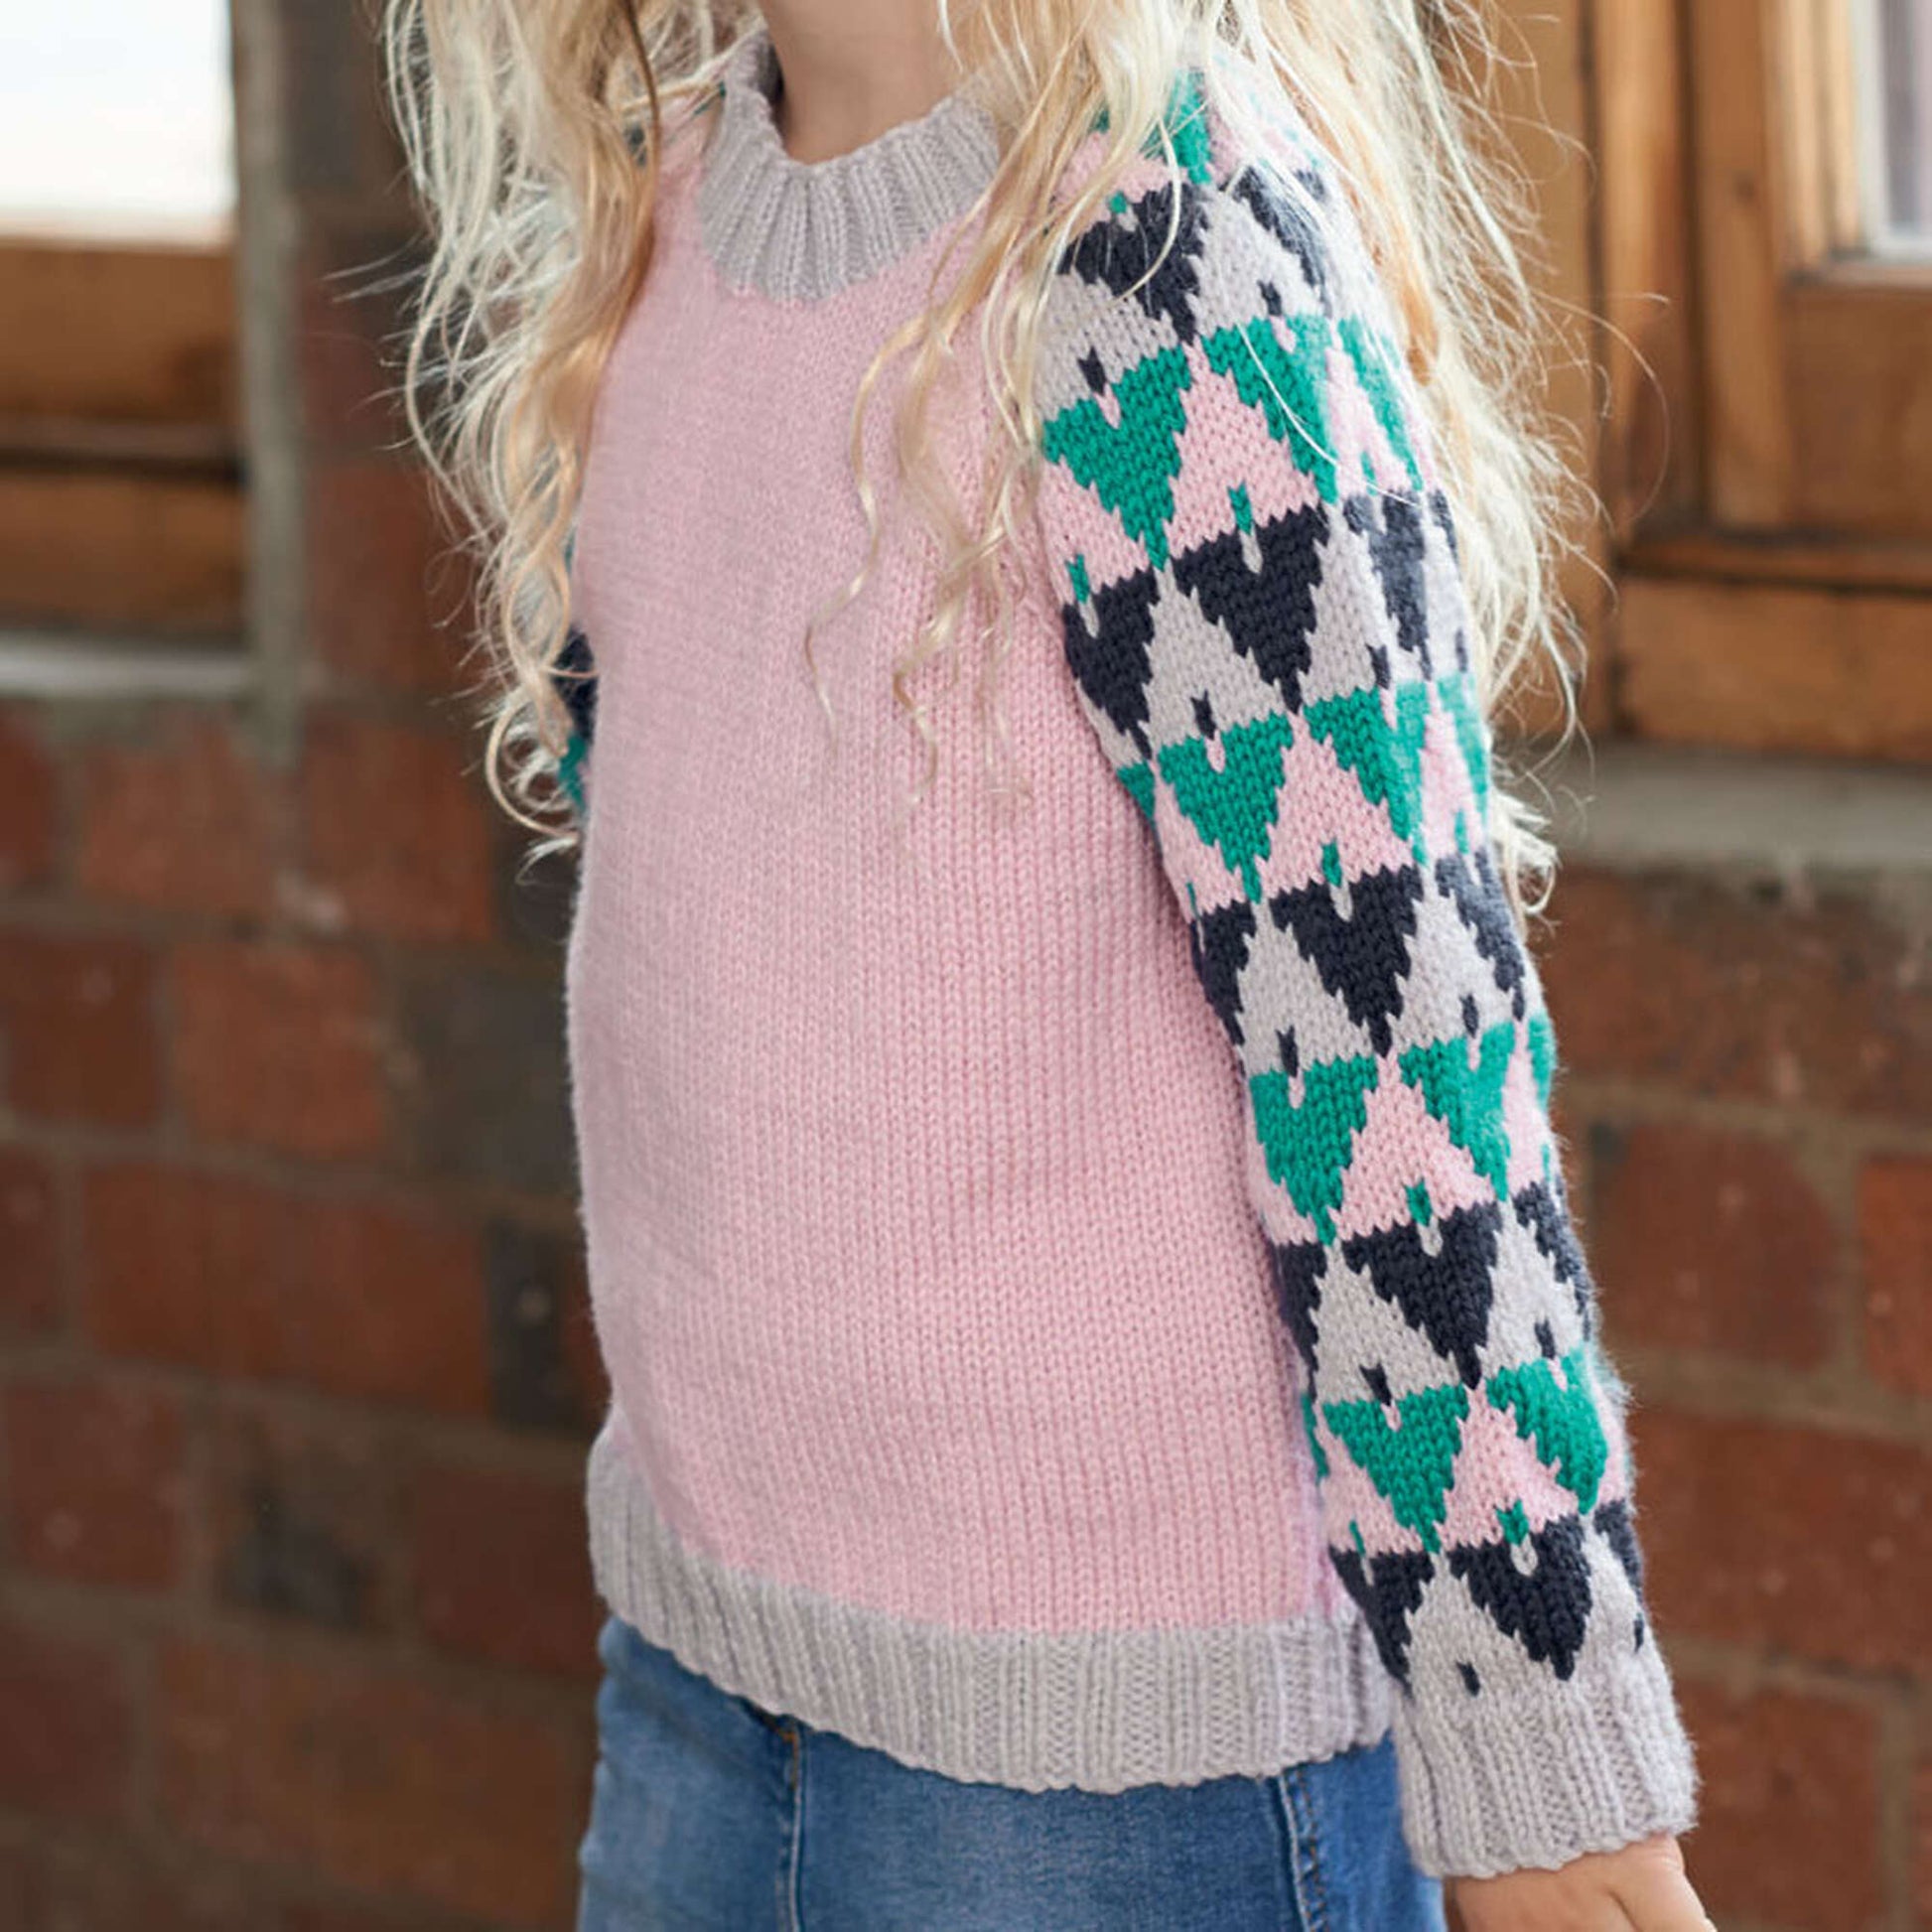 Free Red Heart Kid's Graphic Pullover Knit Pattern